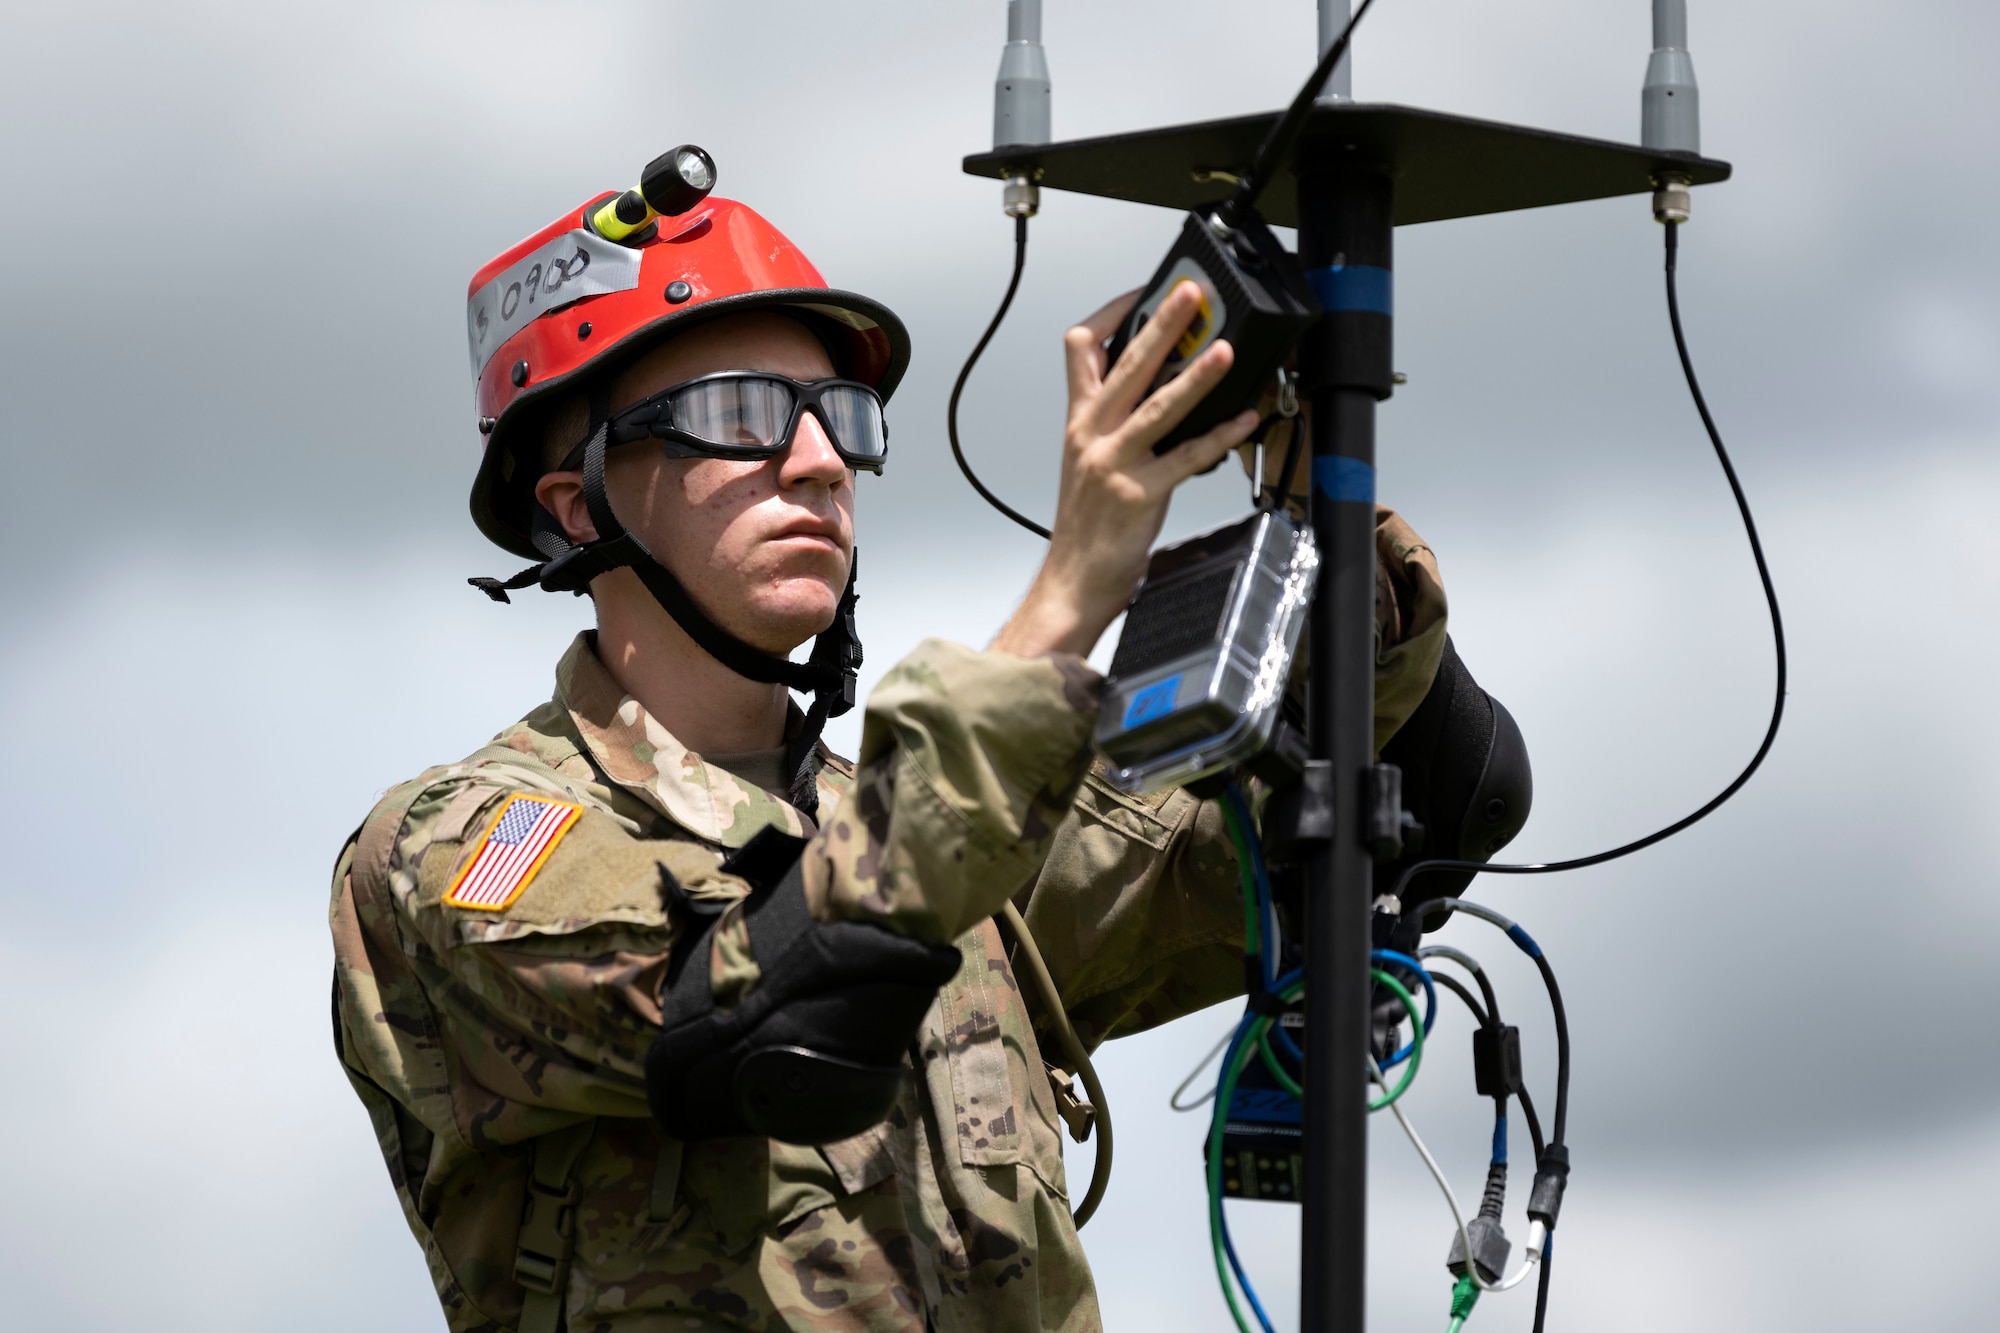 A U.S. Soldier assigned to the Puerto Rico Army National Guard connects equipment during a collective training exercise at Camp Santiago Joint Training Center, Salinas, Puerto Rico, Aug. 10, 2023. The exercise allowed service members assigned to the 156th Medical Group, 123rd Medical Group and the Puerto Rico Army National Guard to exchange knowledge and implement the National Guard CBRN Response Enterprise Information Management System, which assists with accelerating data collection from search and extraction teams in emergency events. (U.S. Air National Guard photo by Master Sgt. Rafael D. Rosa)